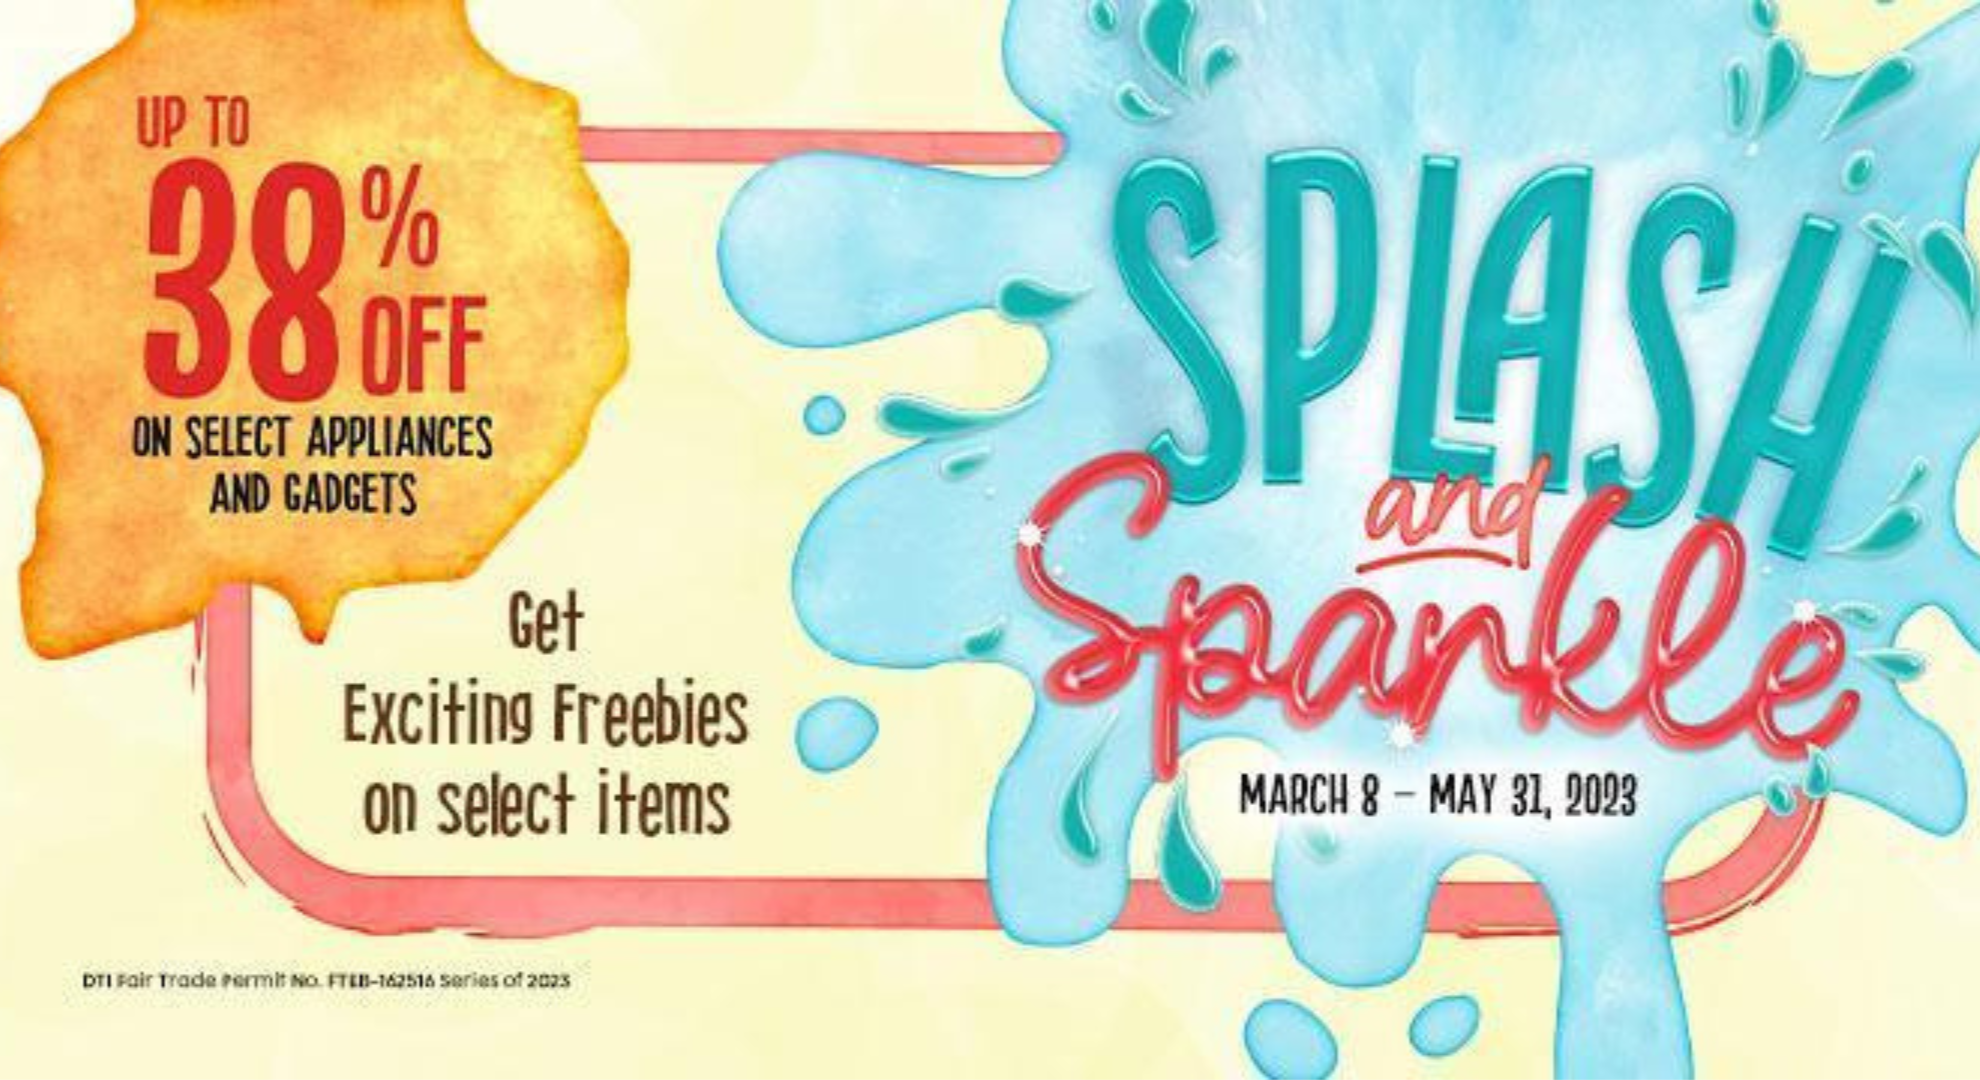 Make a splash with 38% off sparkling deals from Robinsons Appliances